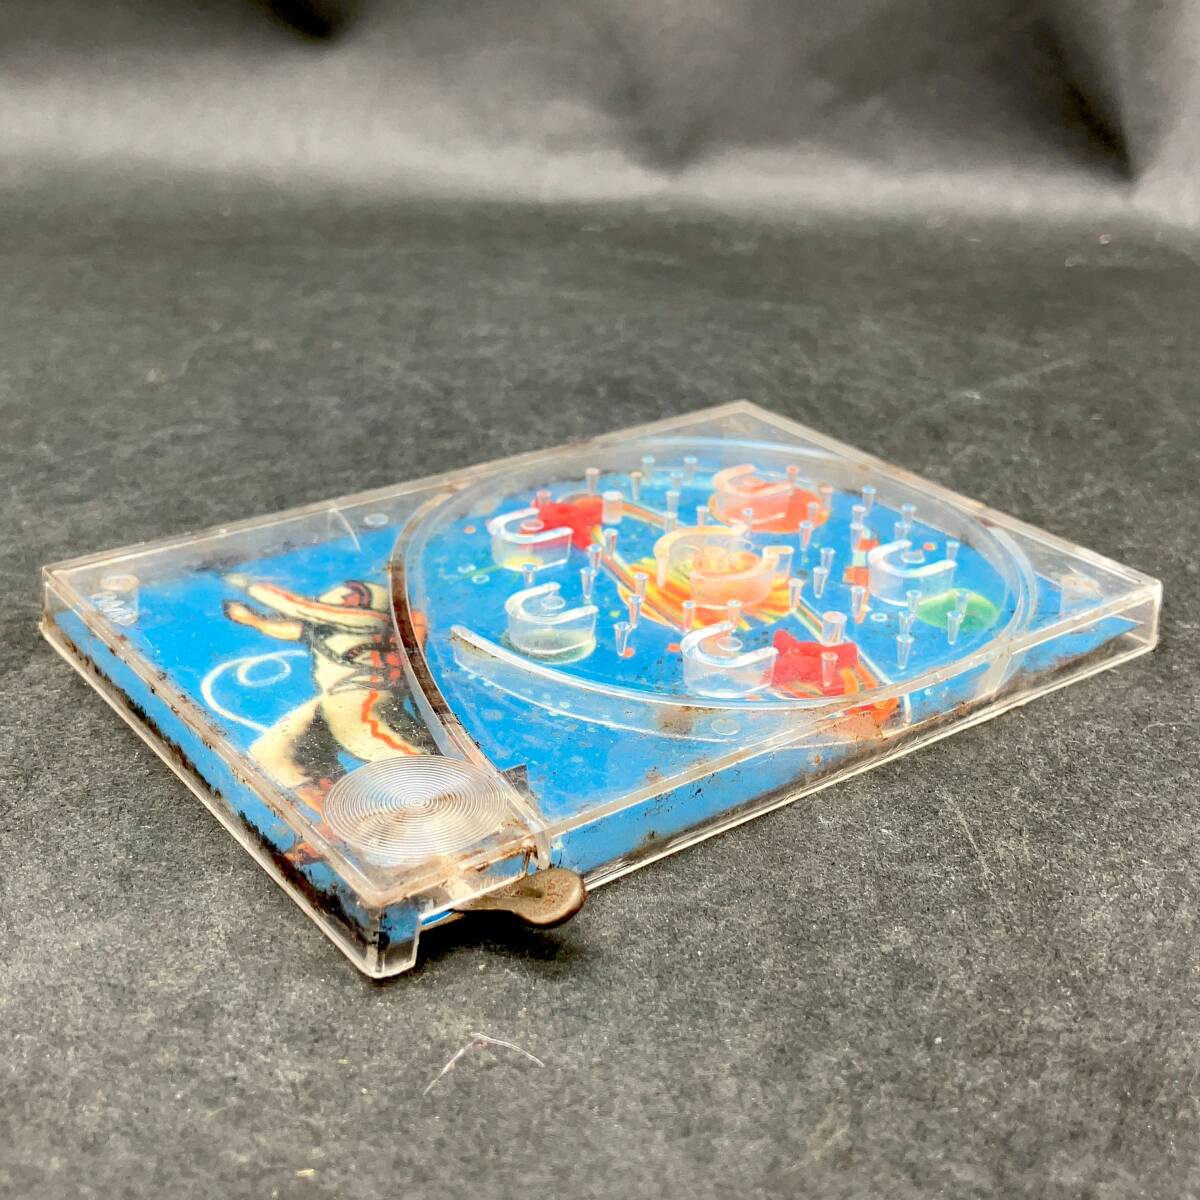 f-46822 that time thing cheap sweets dagashi shop Pachi pachinko cosmos game planet month surface .. earth star astronaut tin plate made in Japan dead stock Showa Retro retro toy 